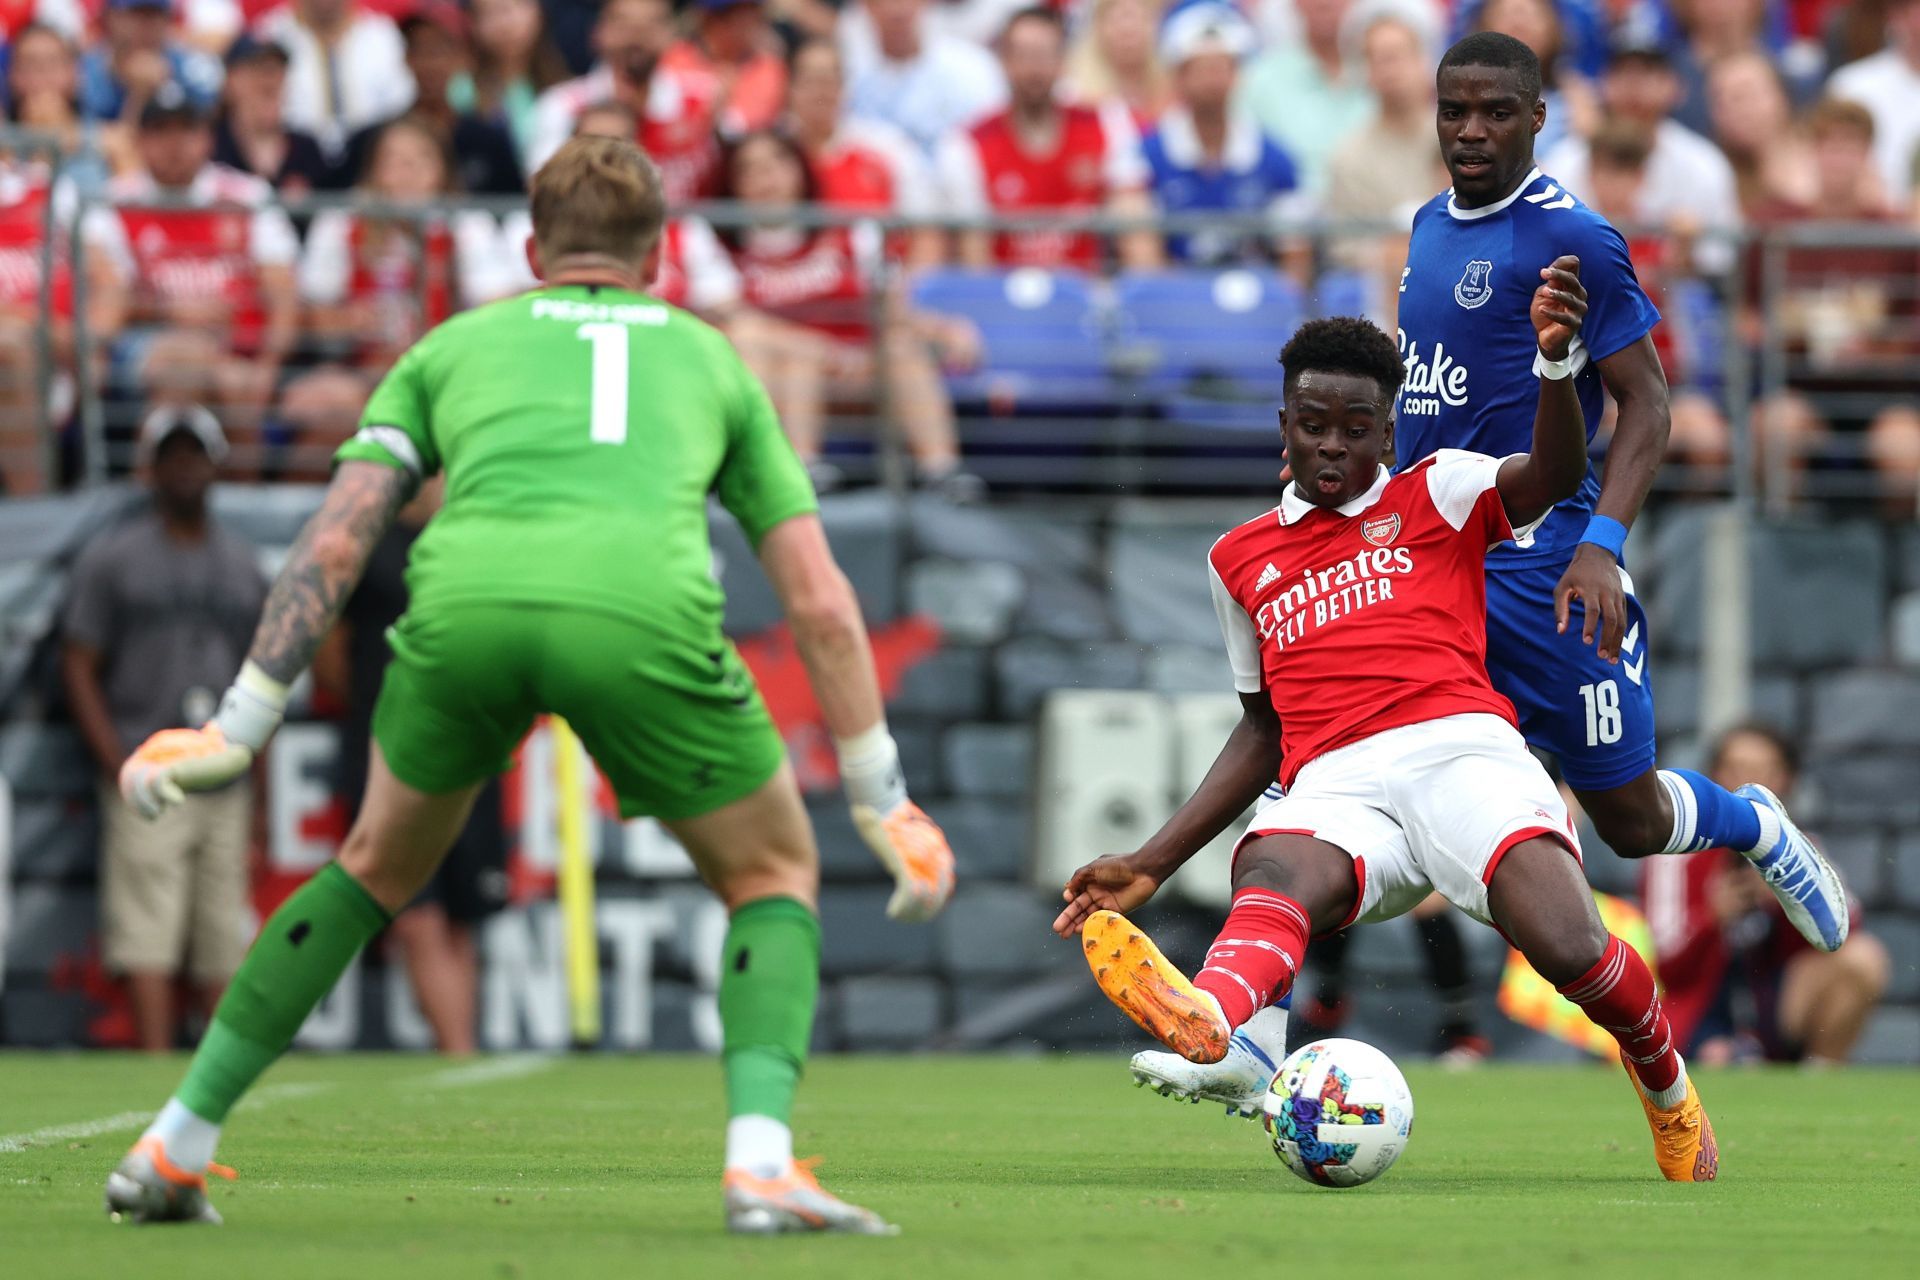 Bukayo Saka has developed in leaps and bounds at the Emirates.